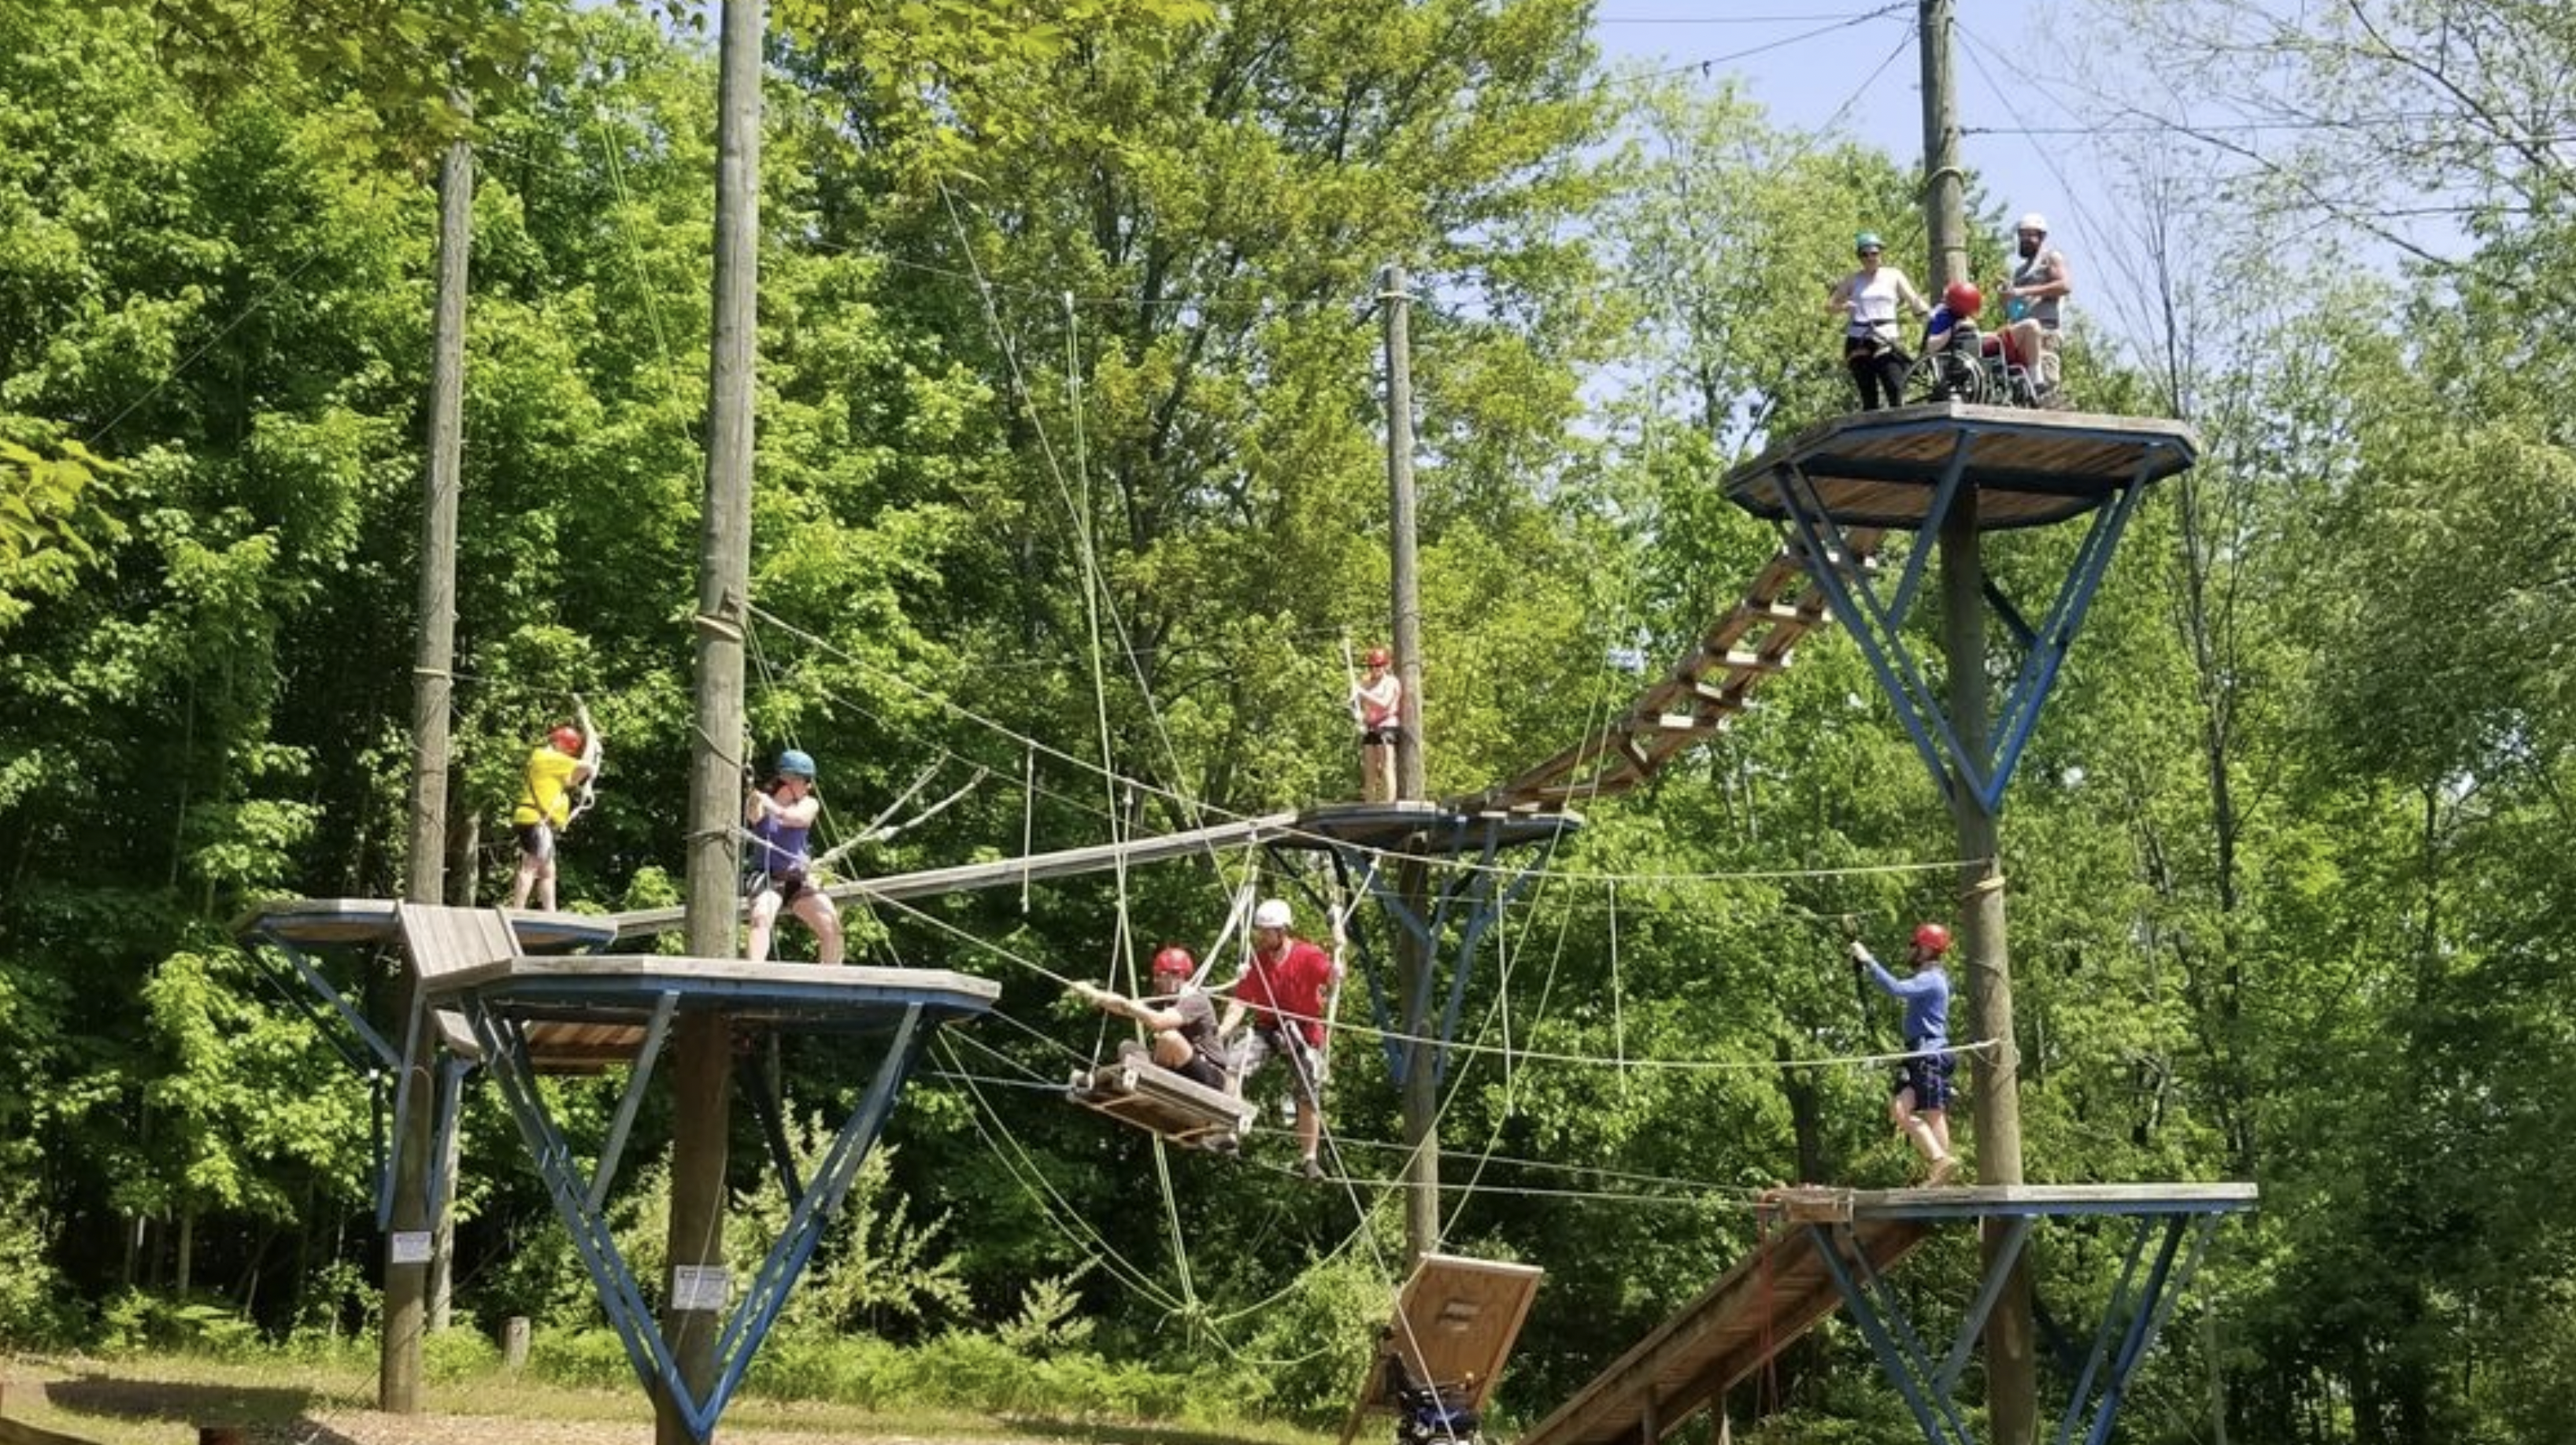 the Fowler Center hosts group events such as corporate team building camps